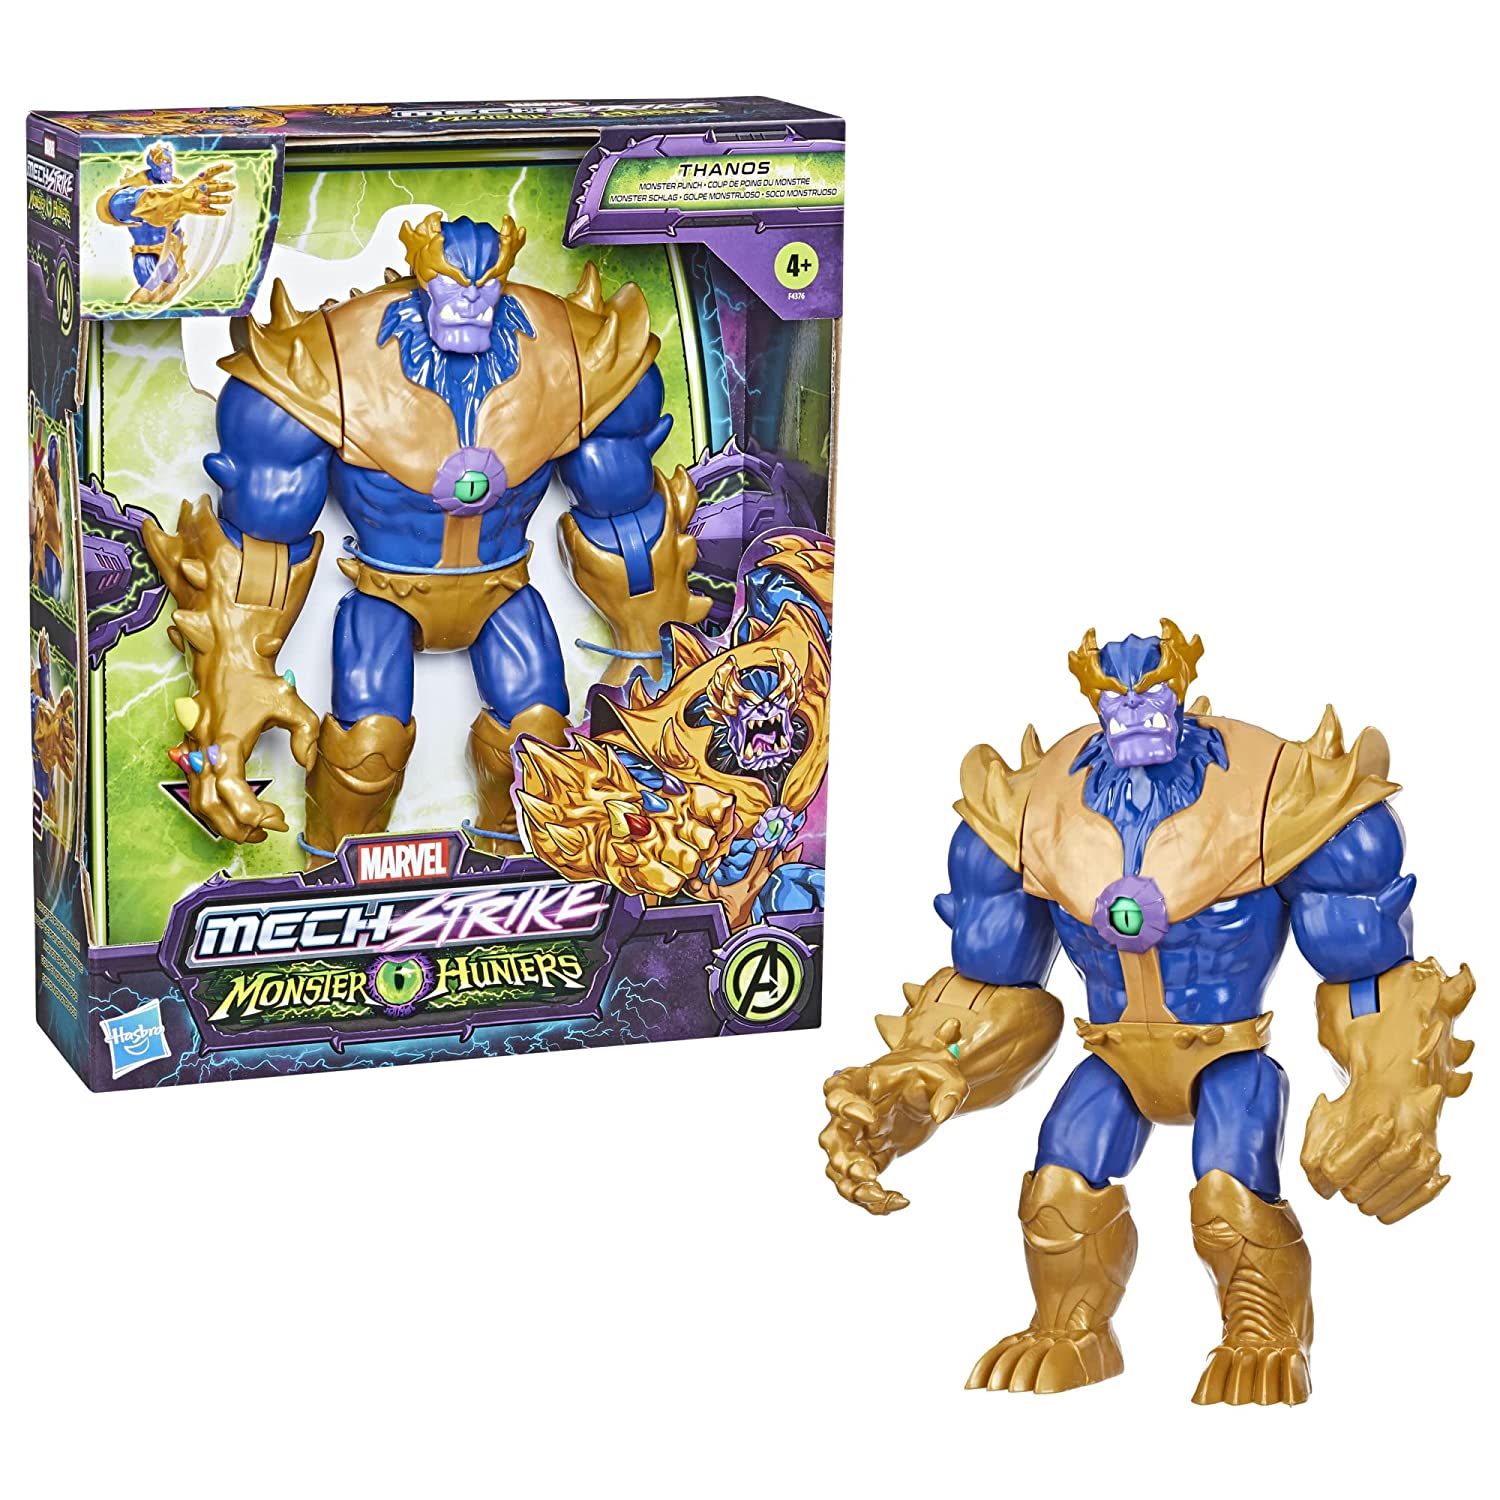 Marvel Avengers Mech Strike Monster Hunters 9-Inch-Scale Monster Punch Thanos Deluxe Action Figure for Kids Ages 4 and Up